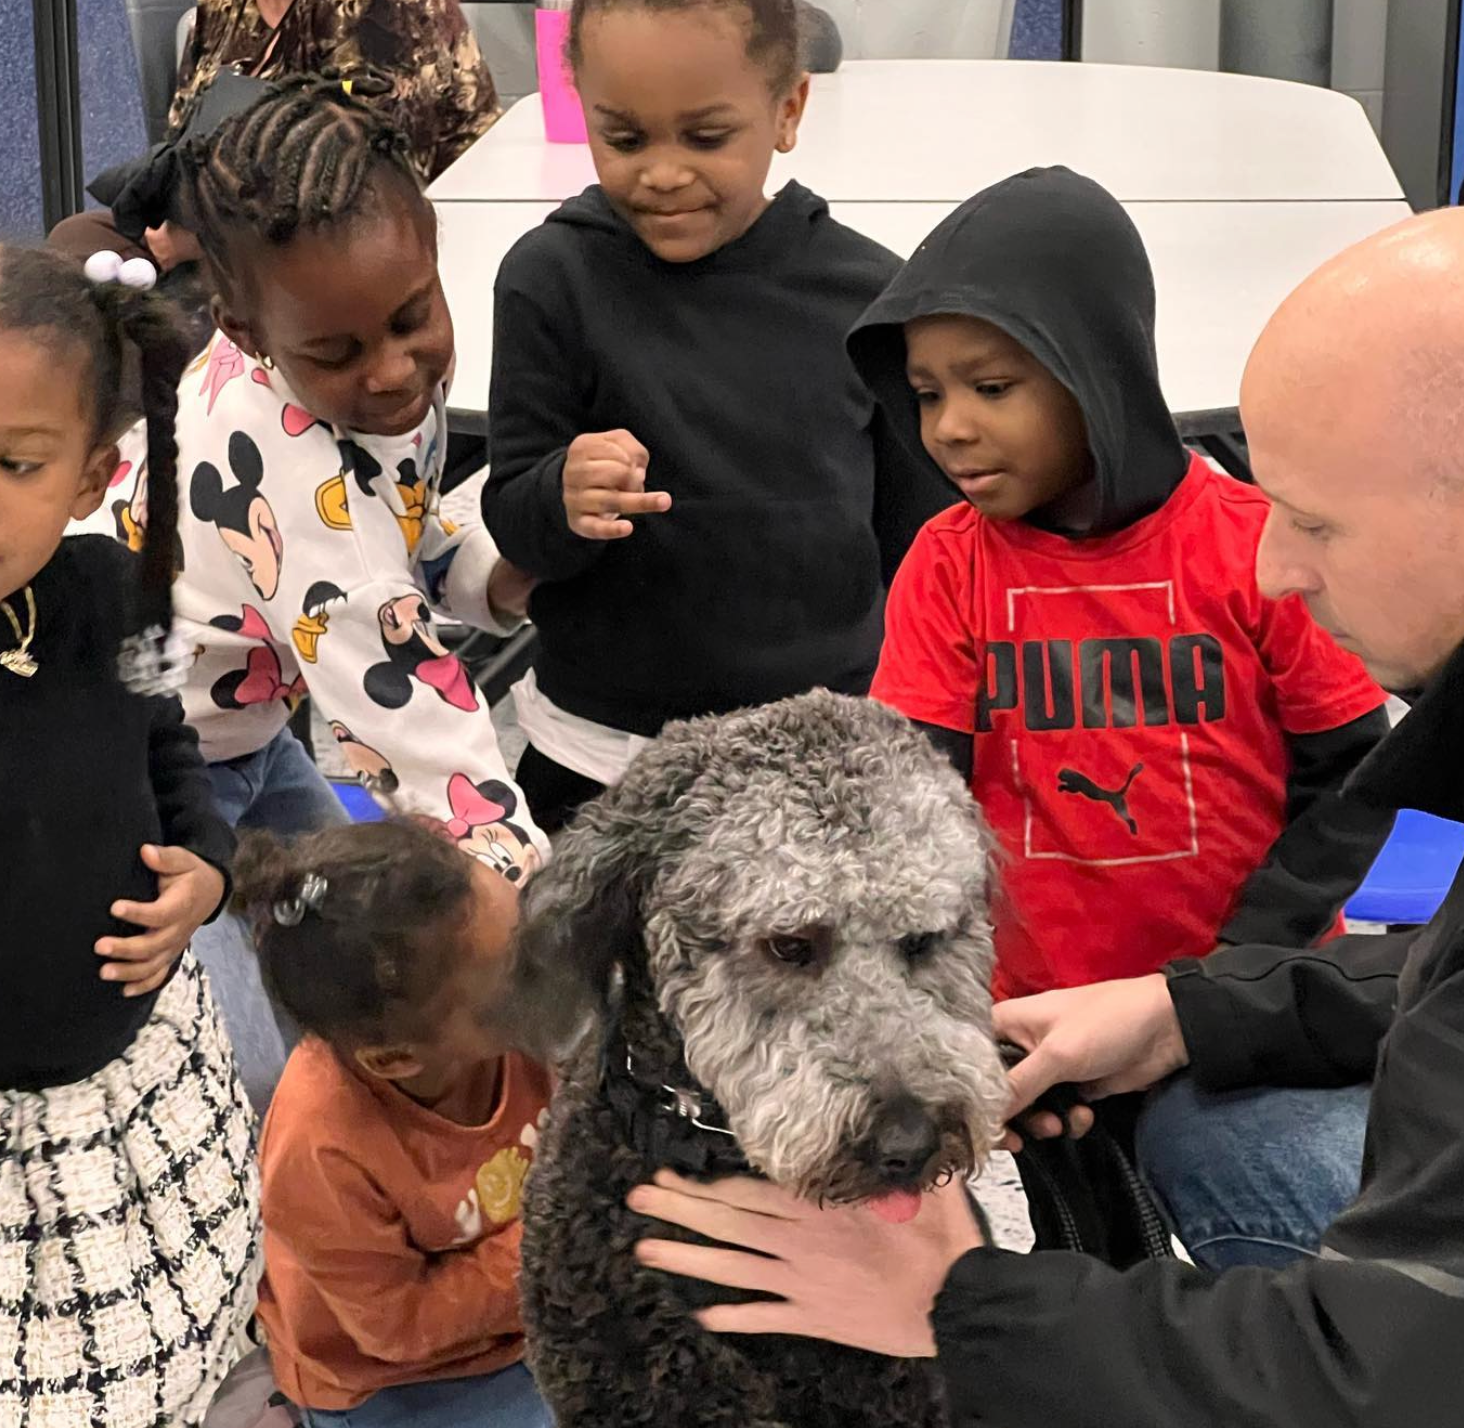 Police Therapy Dog Visits School